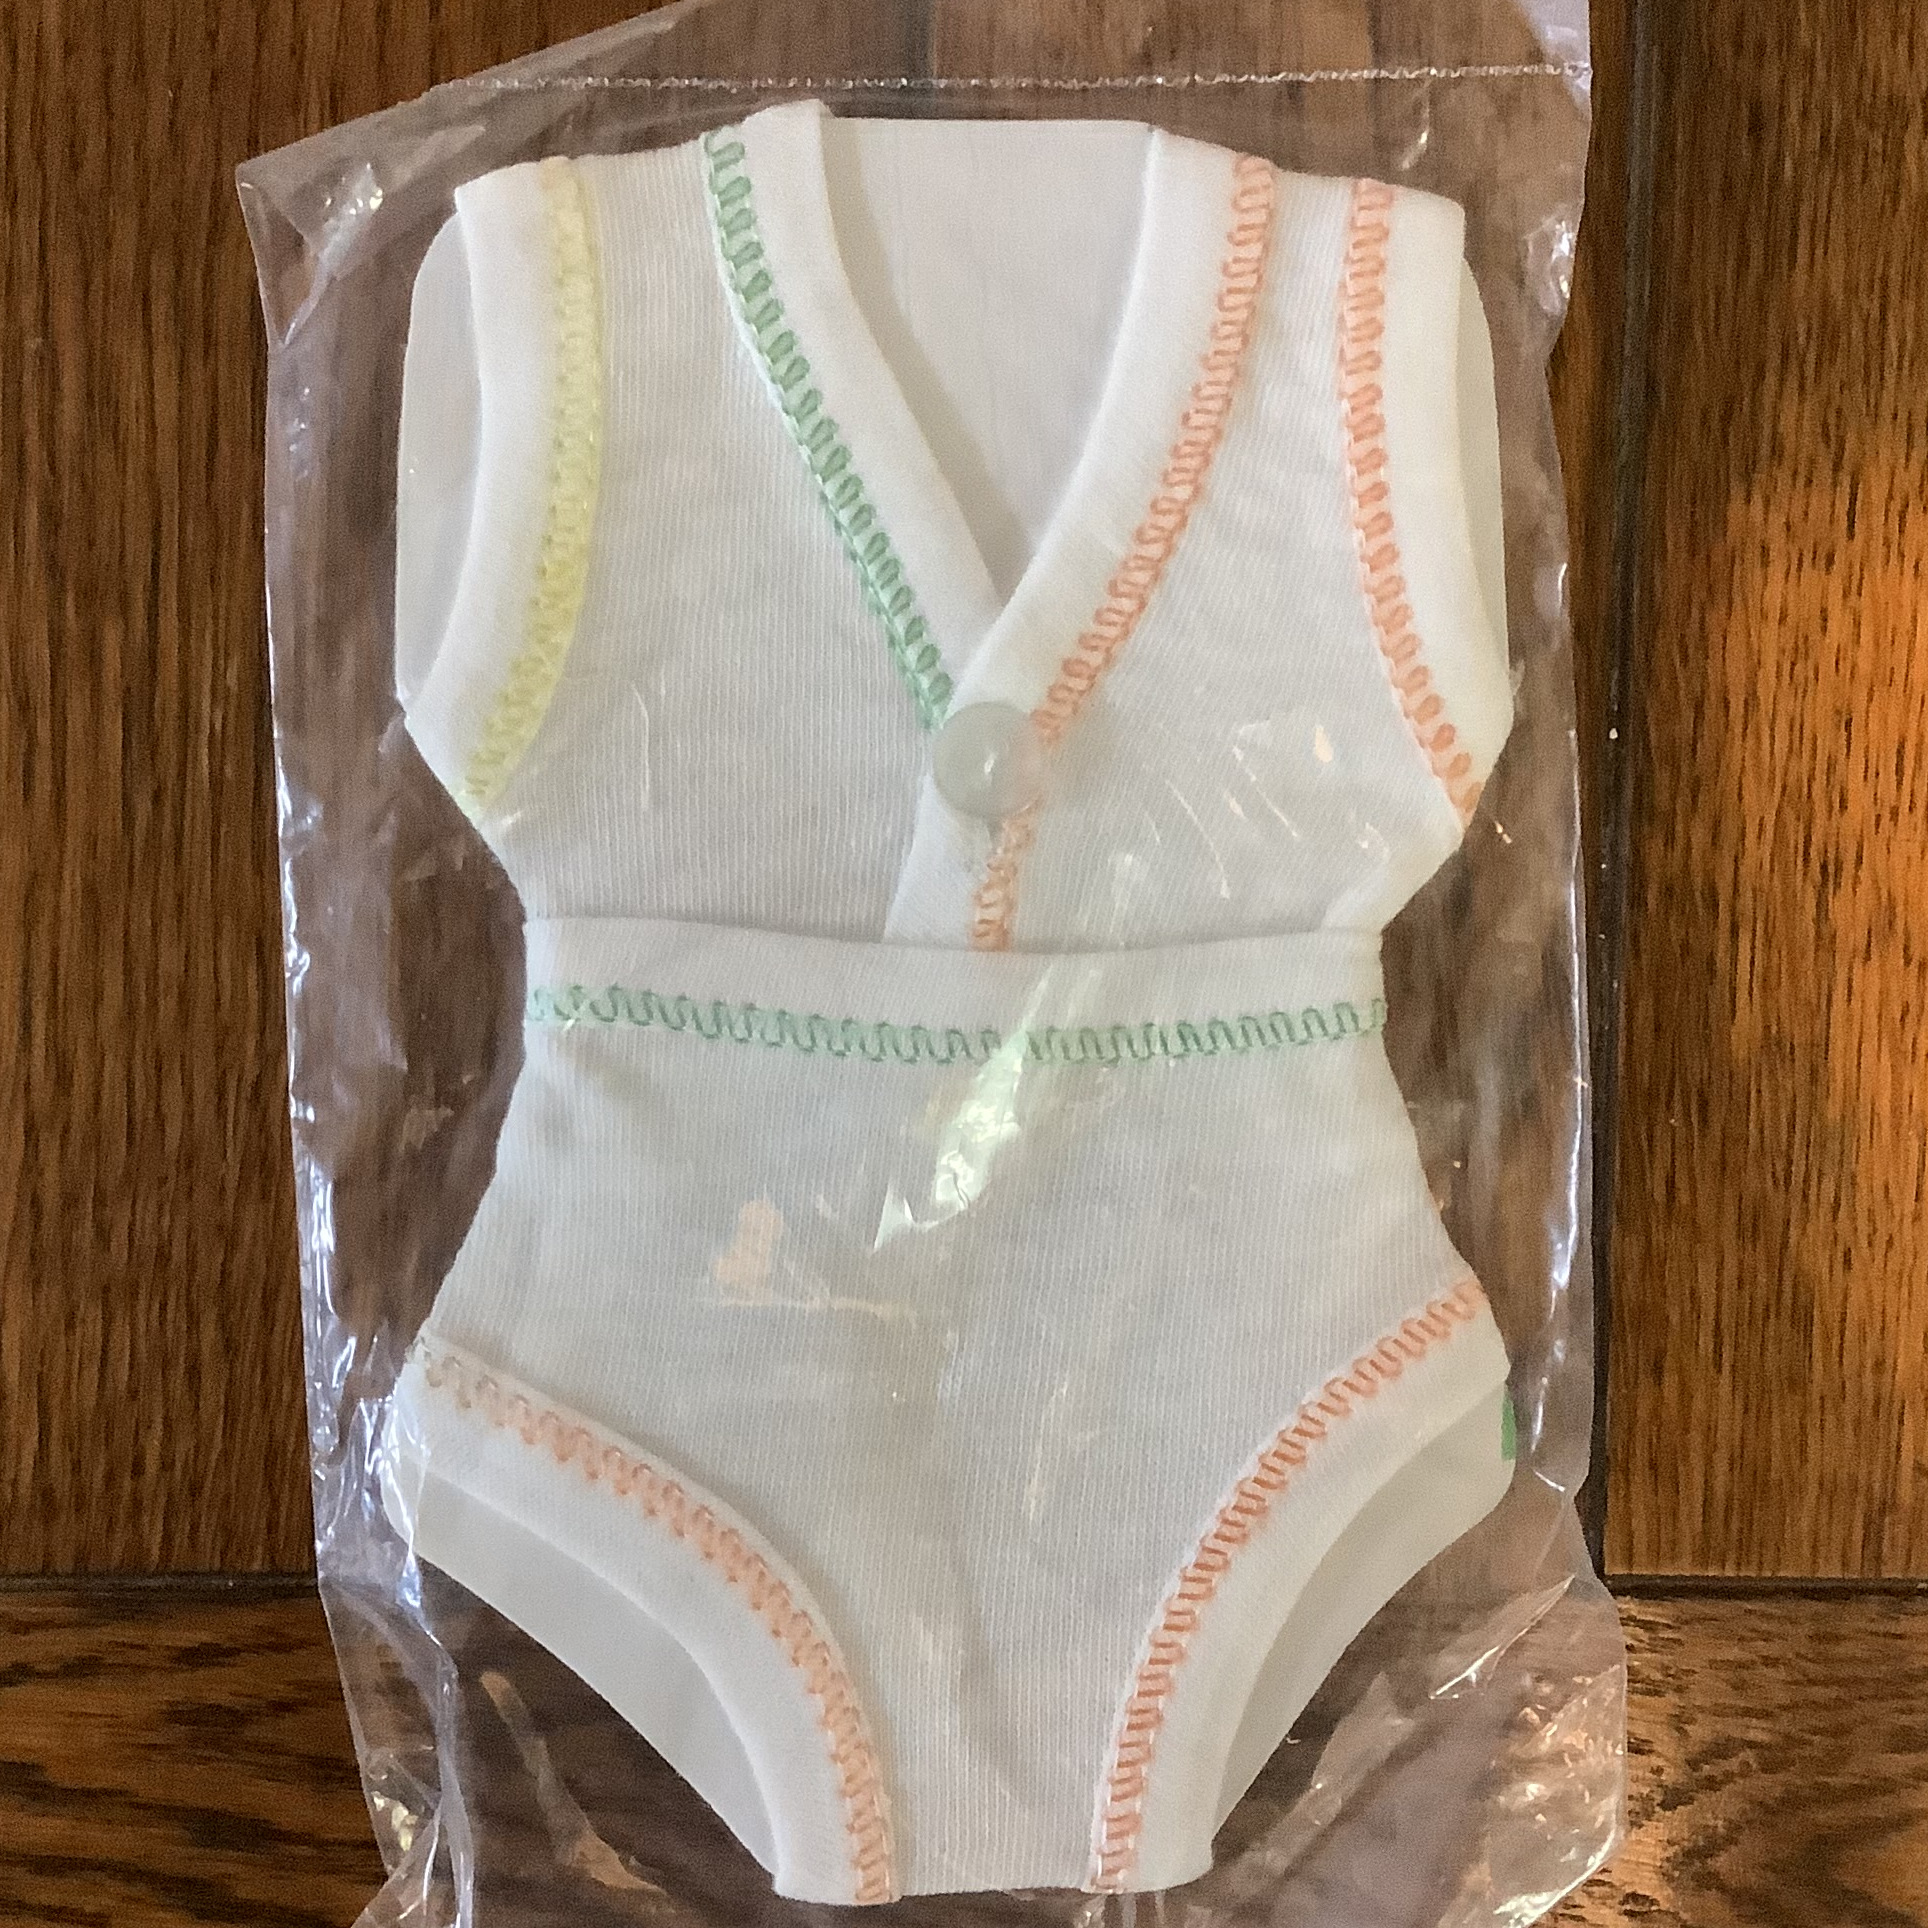 A set of white top and bottom underwear, edged in deliberately asymmetrical pattern of yellow, green and orange stitching, on a display card